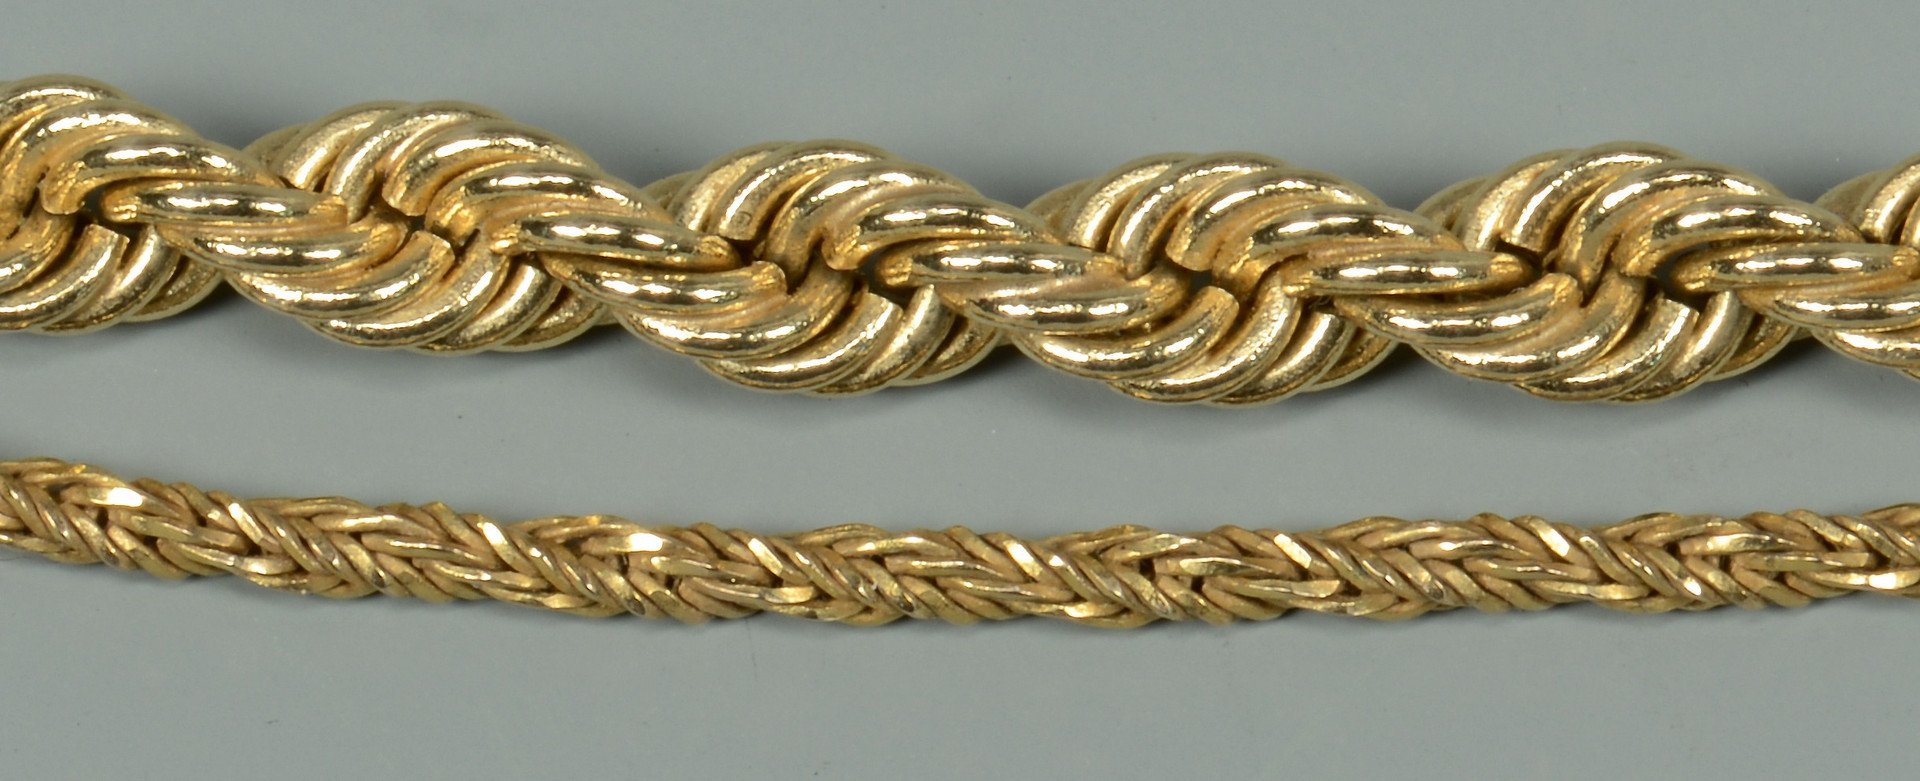 Lot 269: 2 14k Gold Rope Necklaces